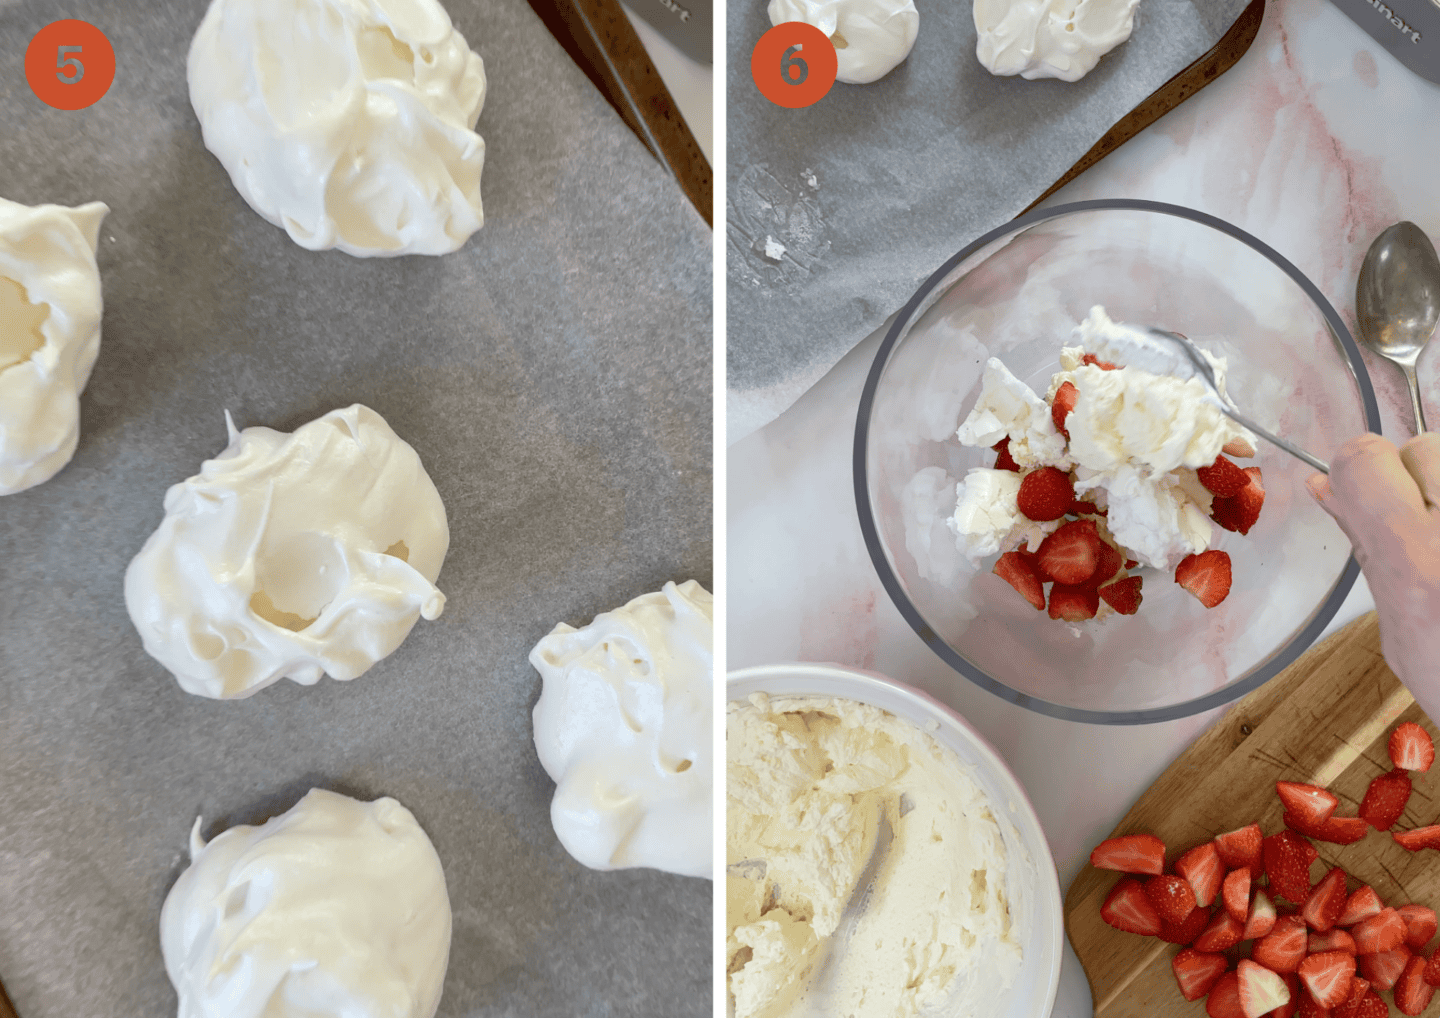 The cooked meringues and assembling the Eton Mess.